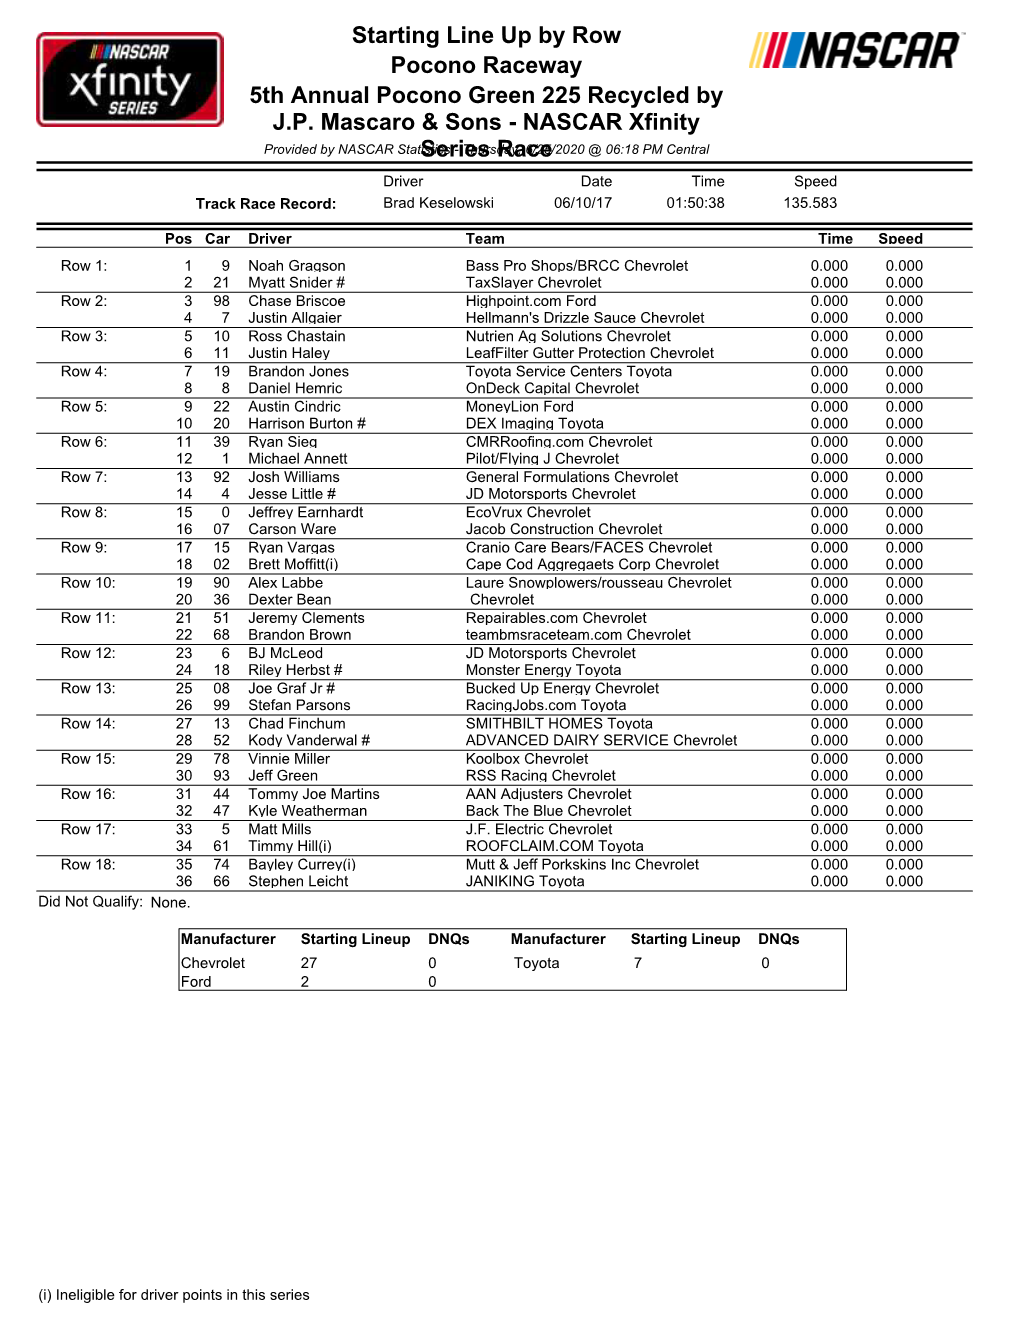 Starting Lineup Dnqs Manufacturer Starting Lineup Dnqs Chevrolet 27 0 Toyota 7 0 Ford 2 0